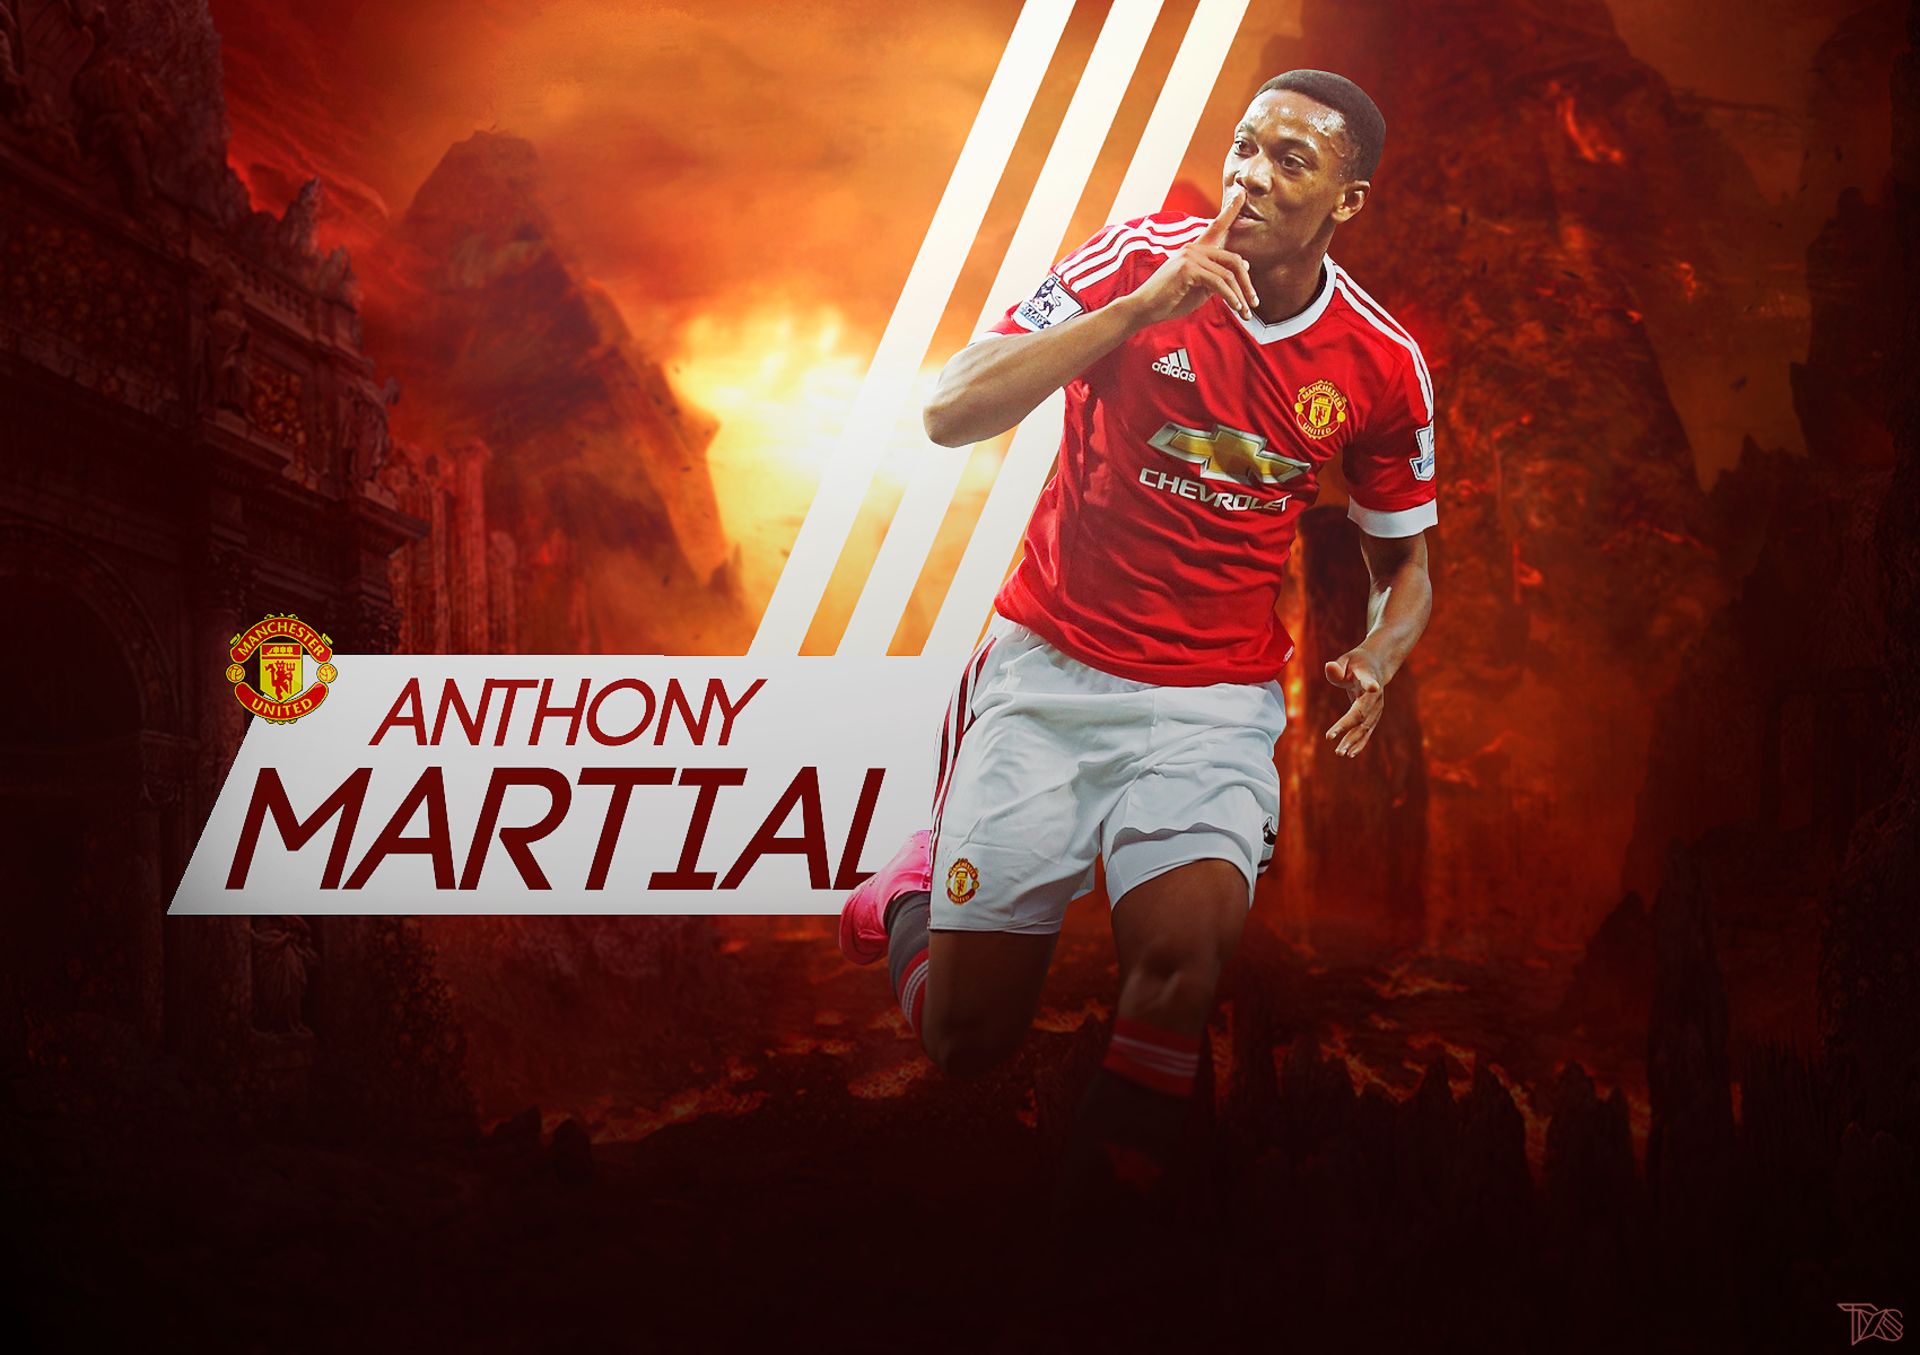 3840x2160 Resolution Anthony Martial Manchester United 4K Wallpaper   Wallpapers Den